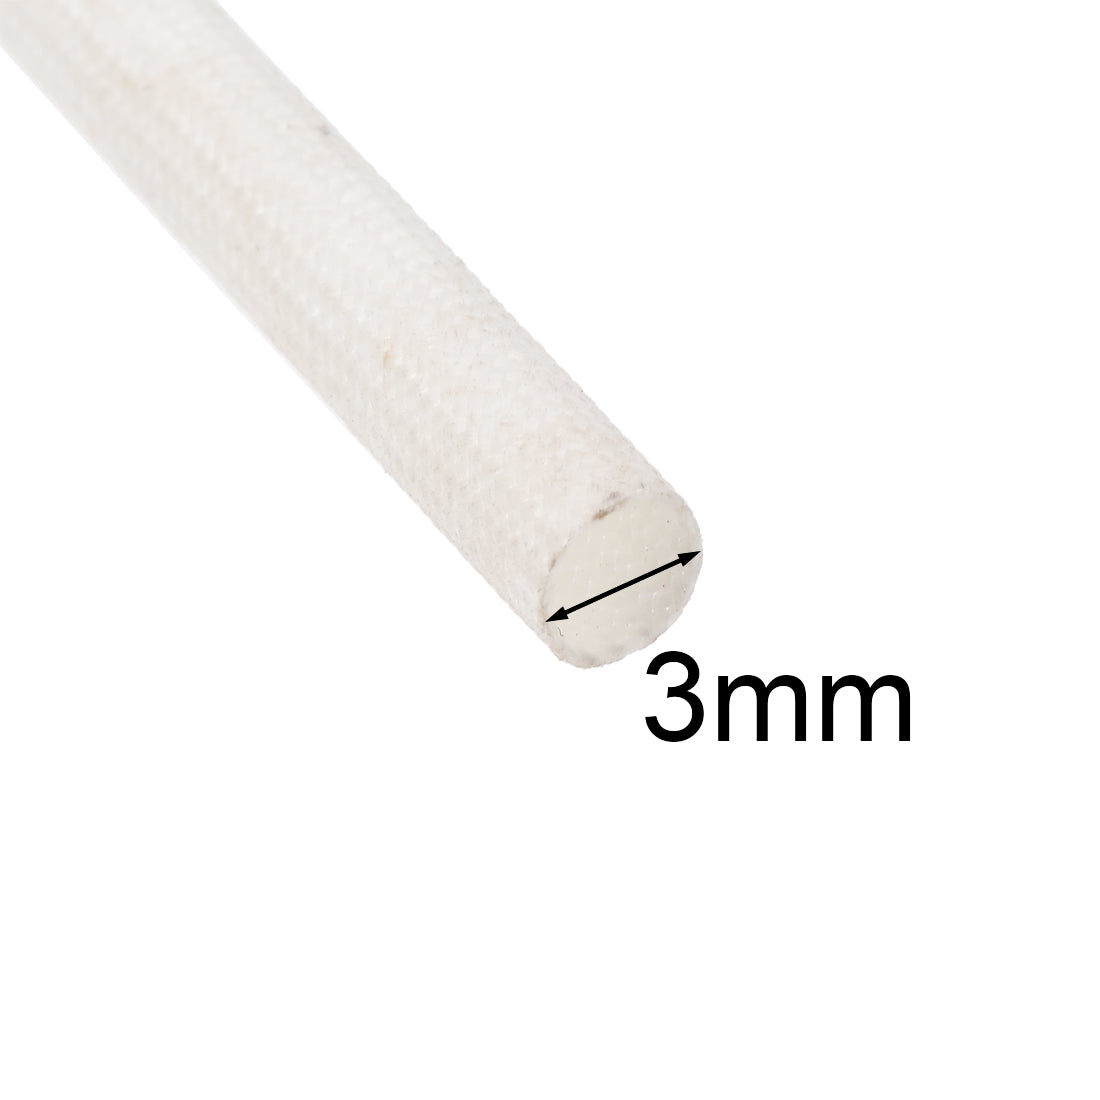 uxcell Uxcell Insulation Cable Protector, 9.8Ft-3mm High TEMP Silicone Fiberglass Sleeve White